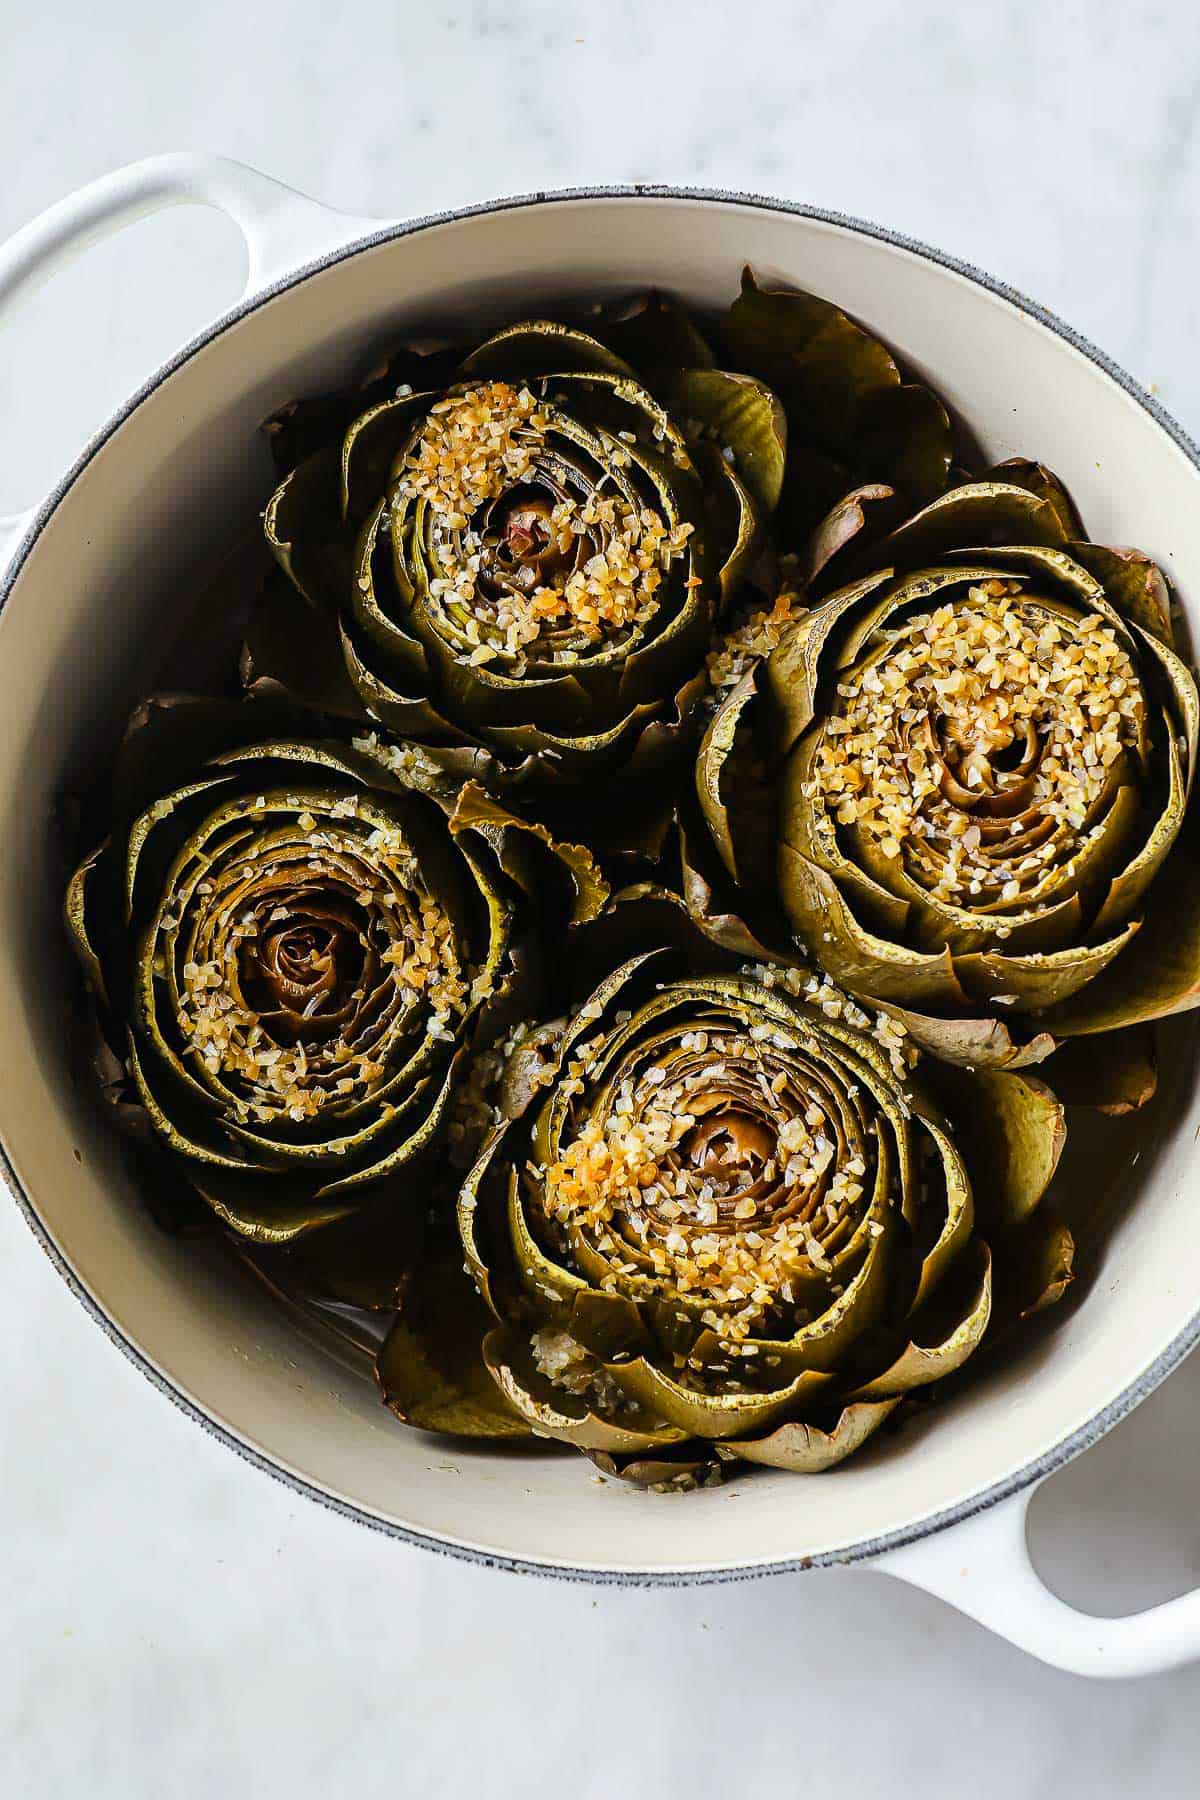 cooked artichokes, steamed in a dutch oven with chicken stock, spices and seasonings